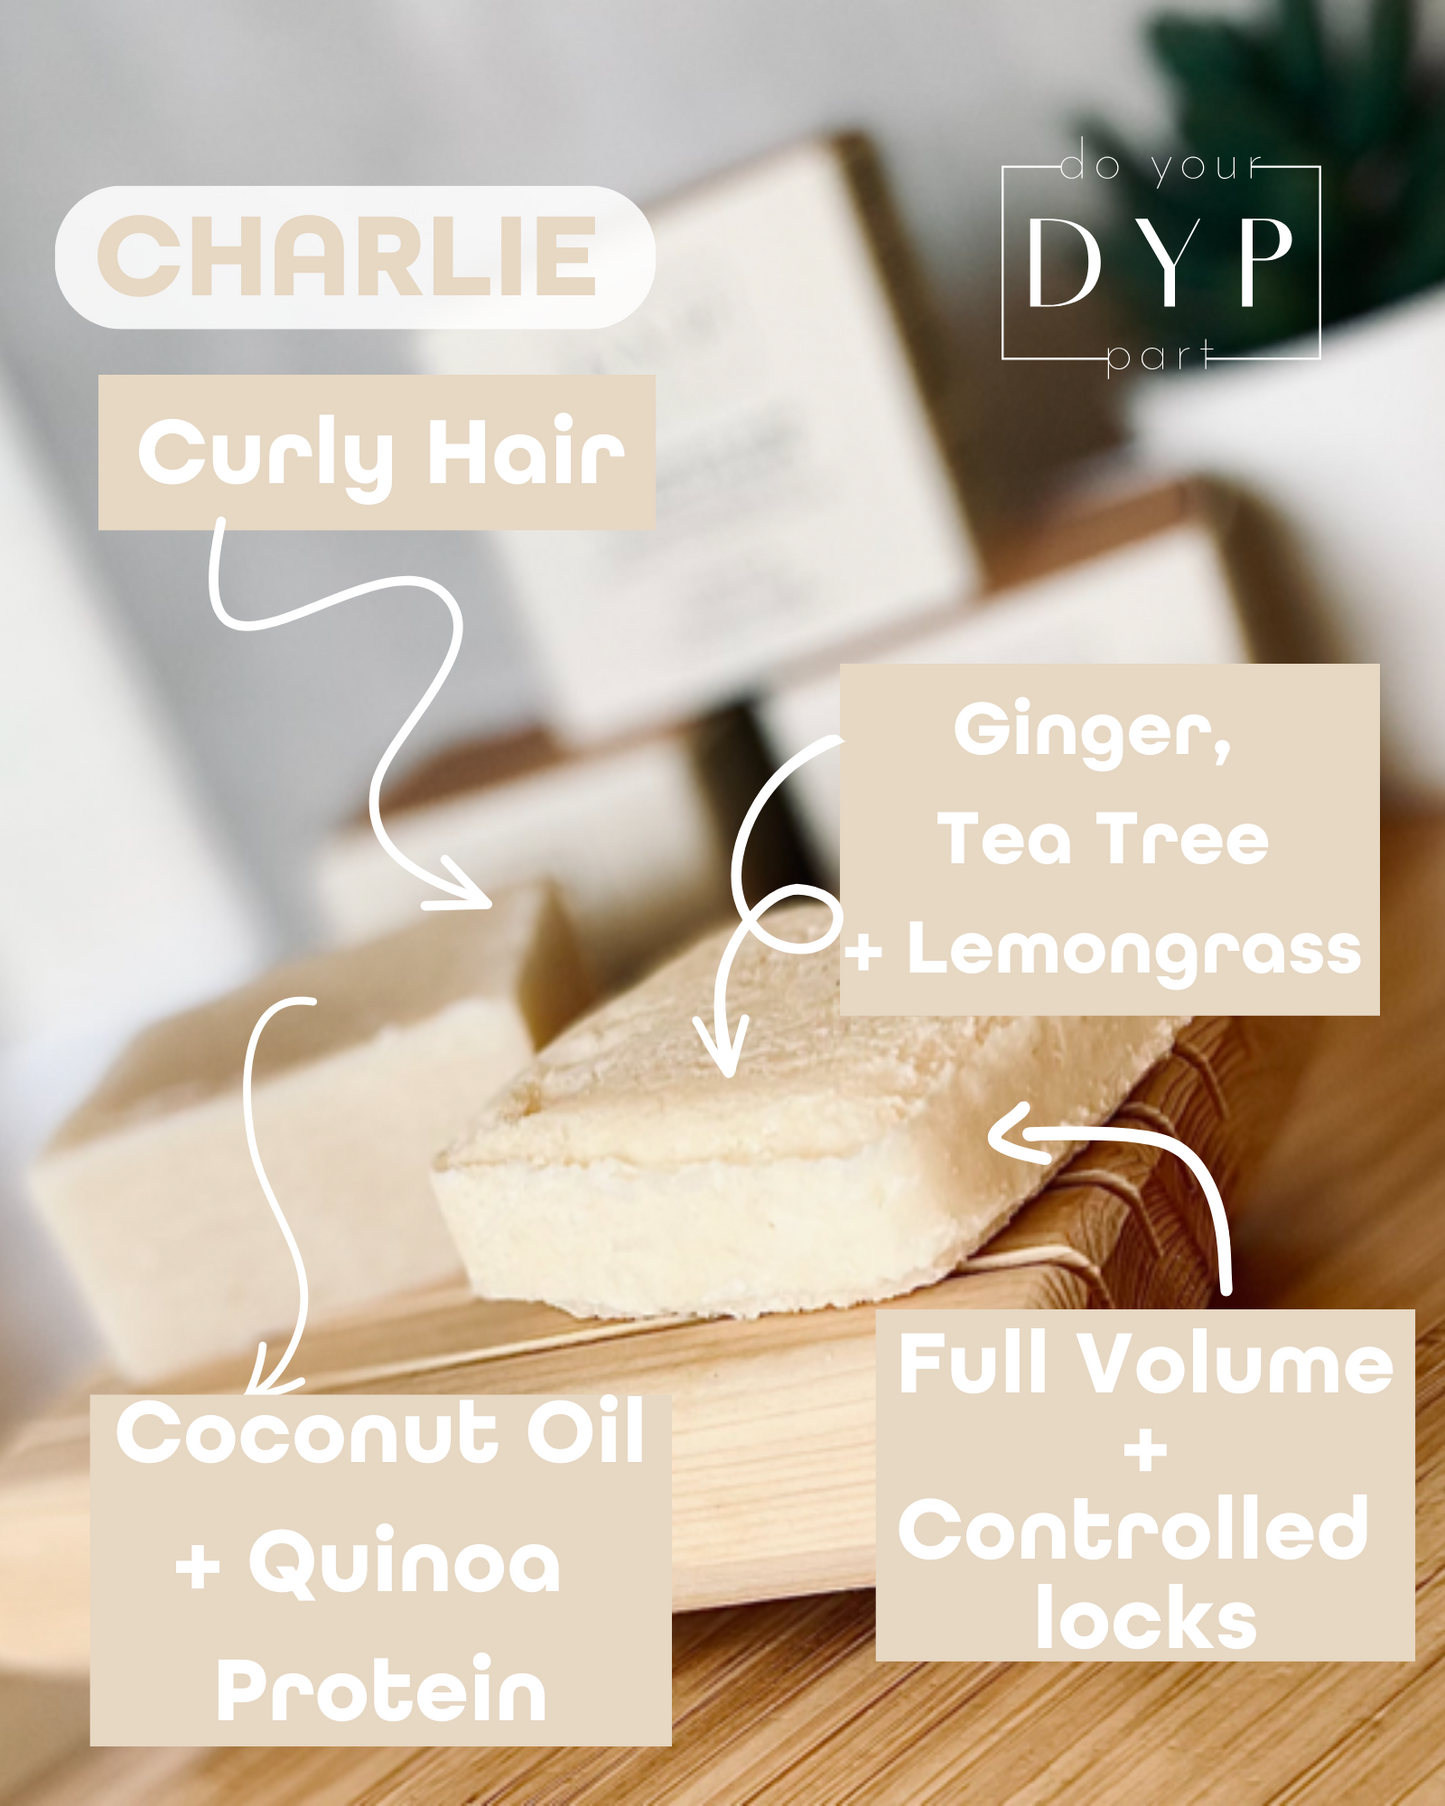 Charlie Hair Bars for Curly or Frizzy Hair